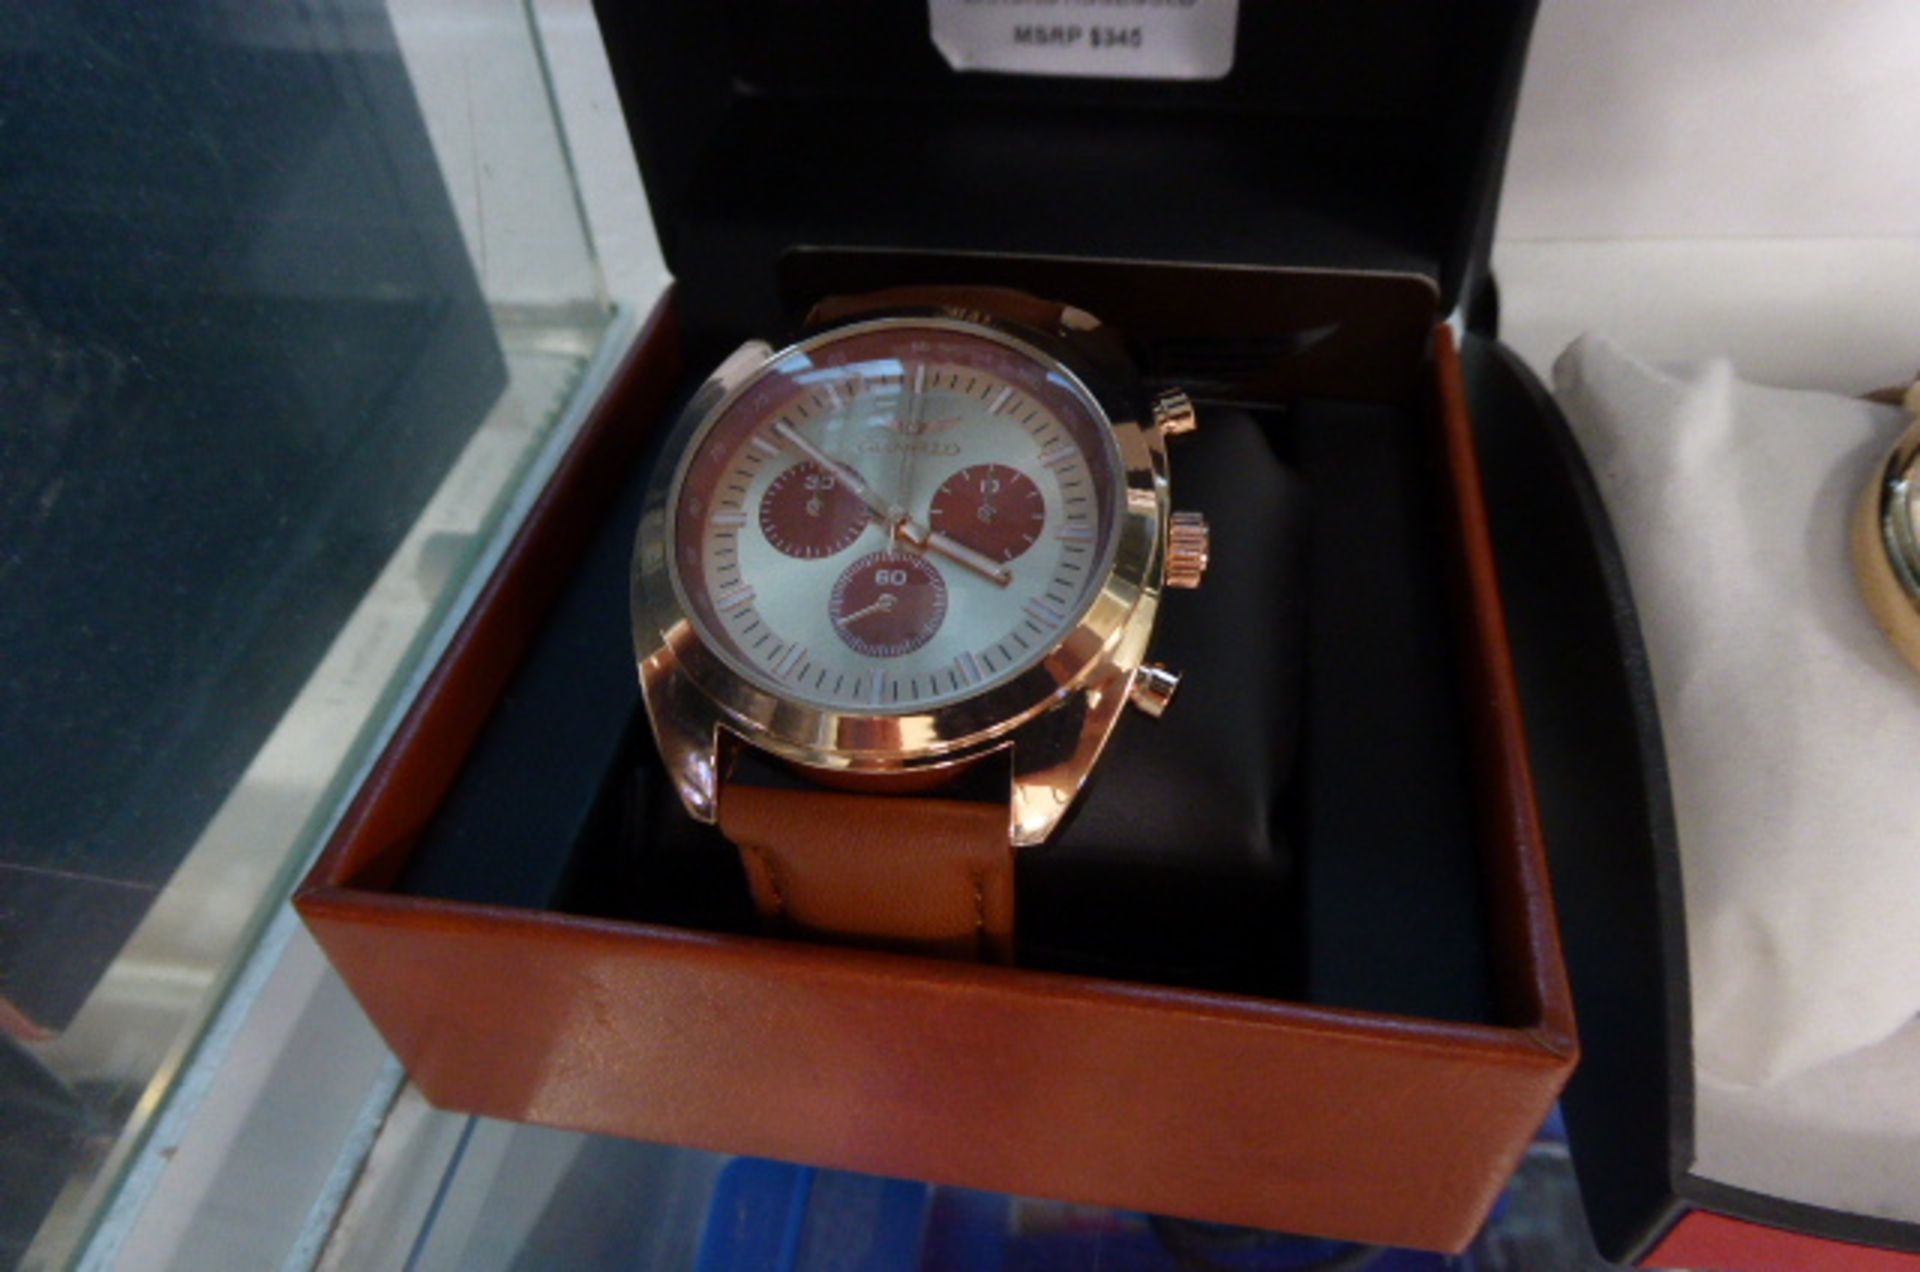 Gianello wristwatch with brown strap in box